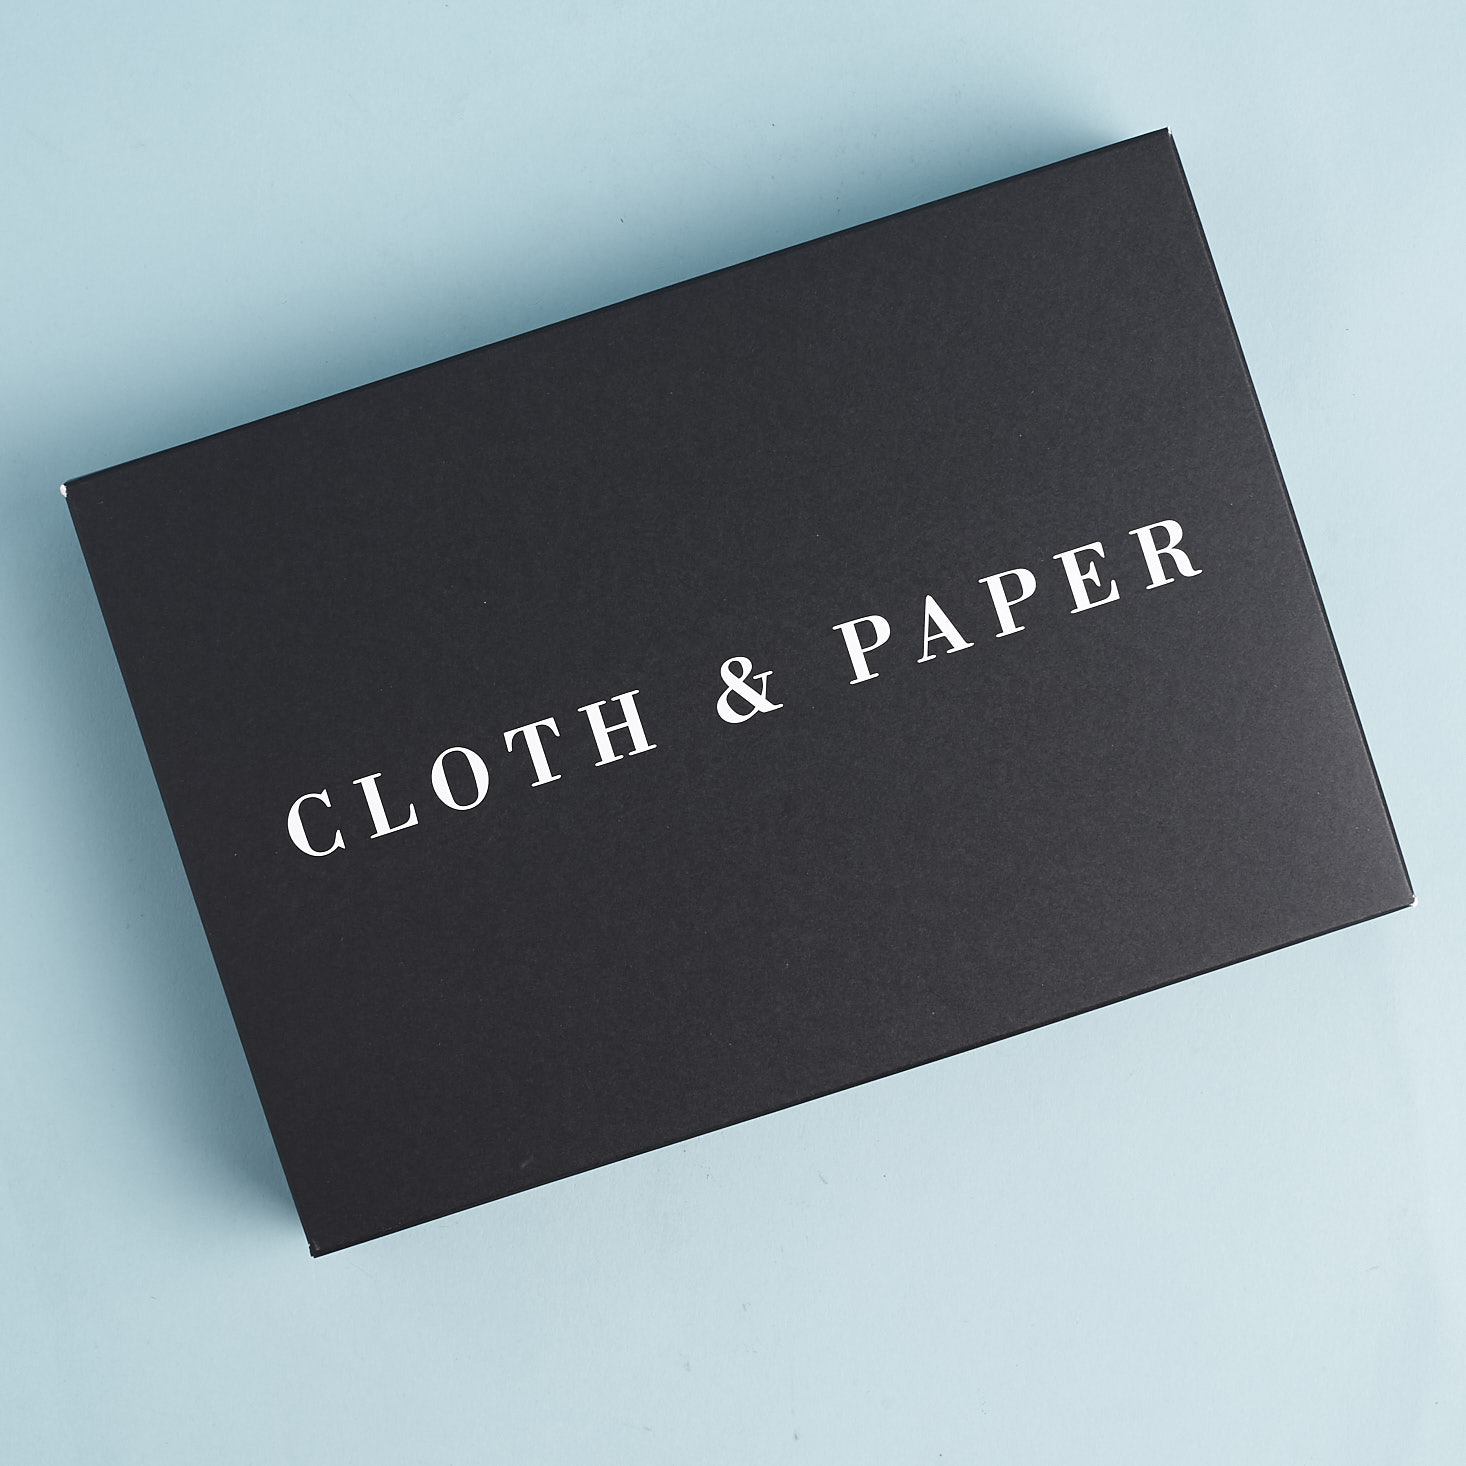 Cloth & Paper Stationery Subscription Box Review – August 2017